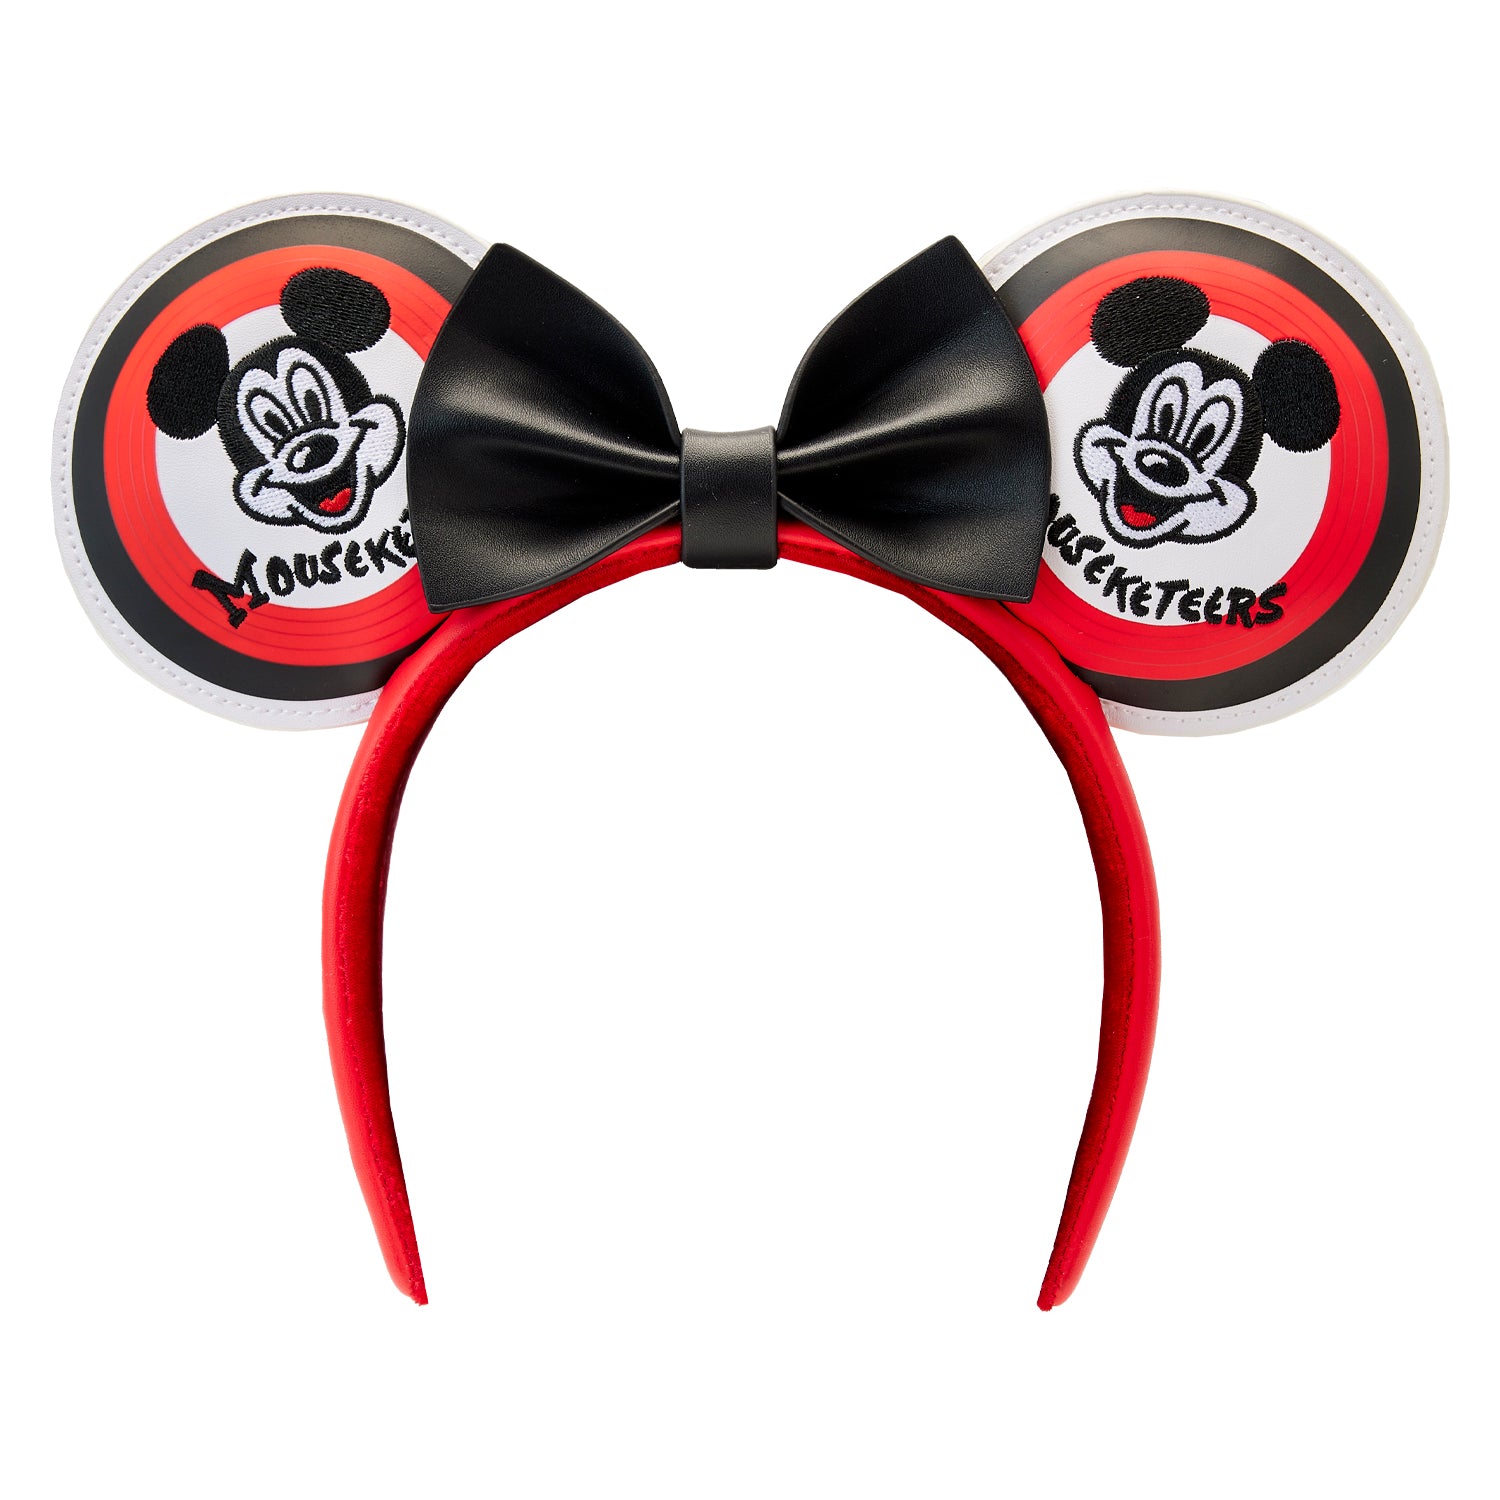 Disney | The Mickey Mouse Club Mouseketeers Ears Headband